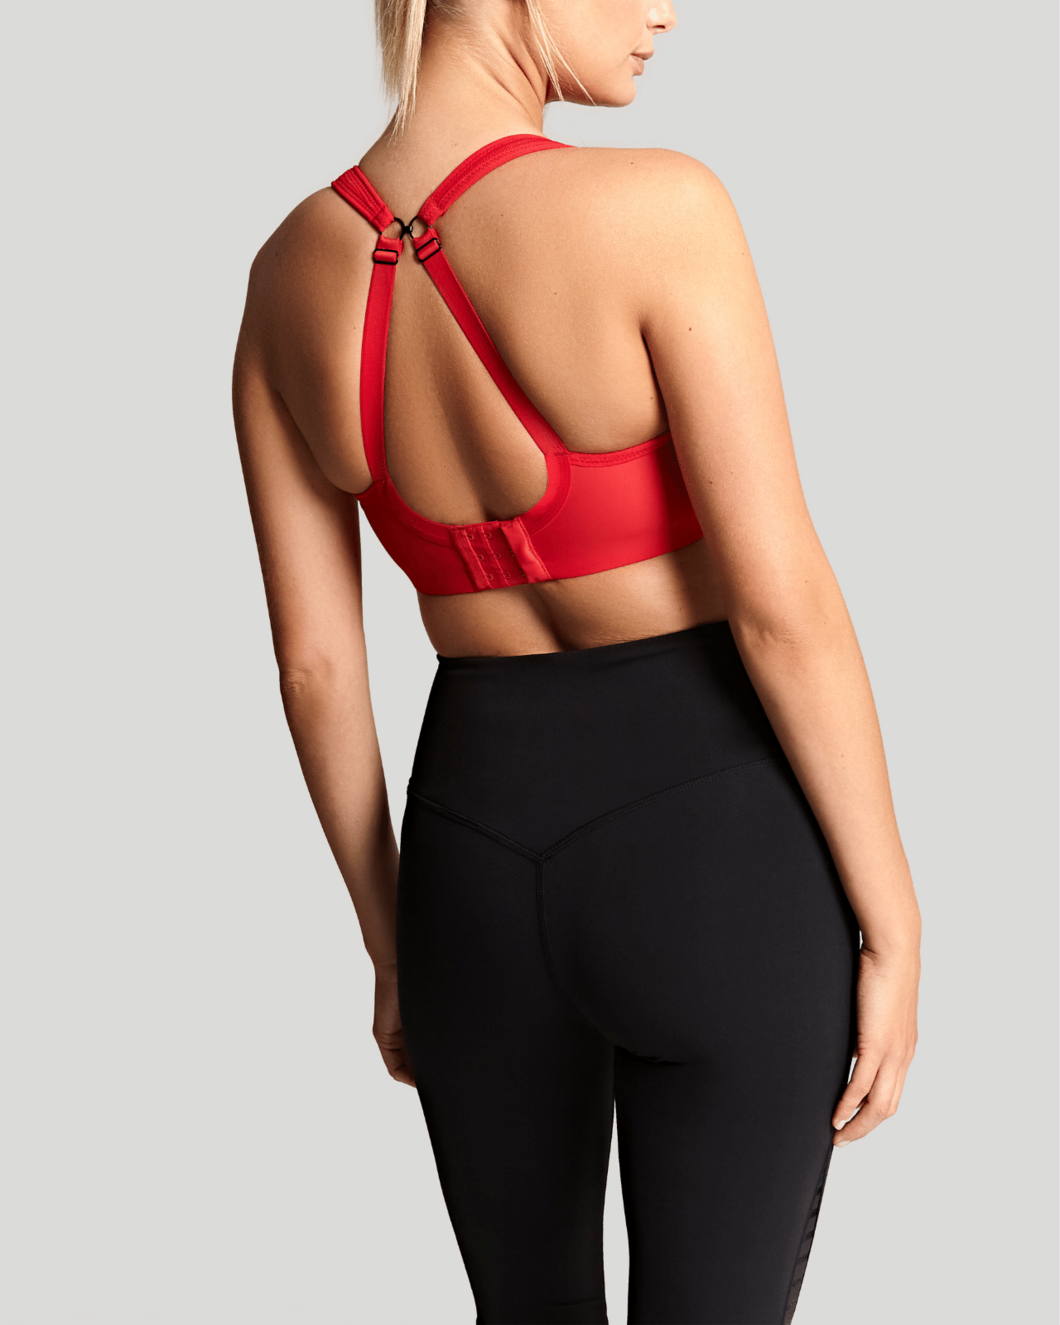 Panache Wired Sports Bra in Fiery Red, worn by model in back view product image demonstrating convertible straps.Panache Wired Sports Bra - Fiery Red worn by model back view